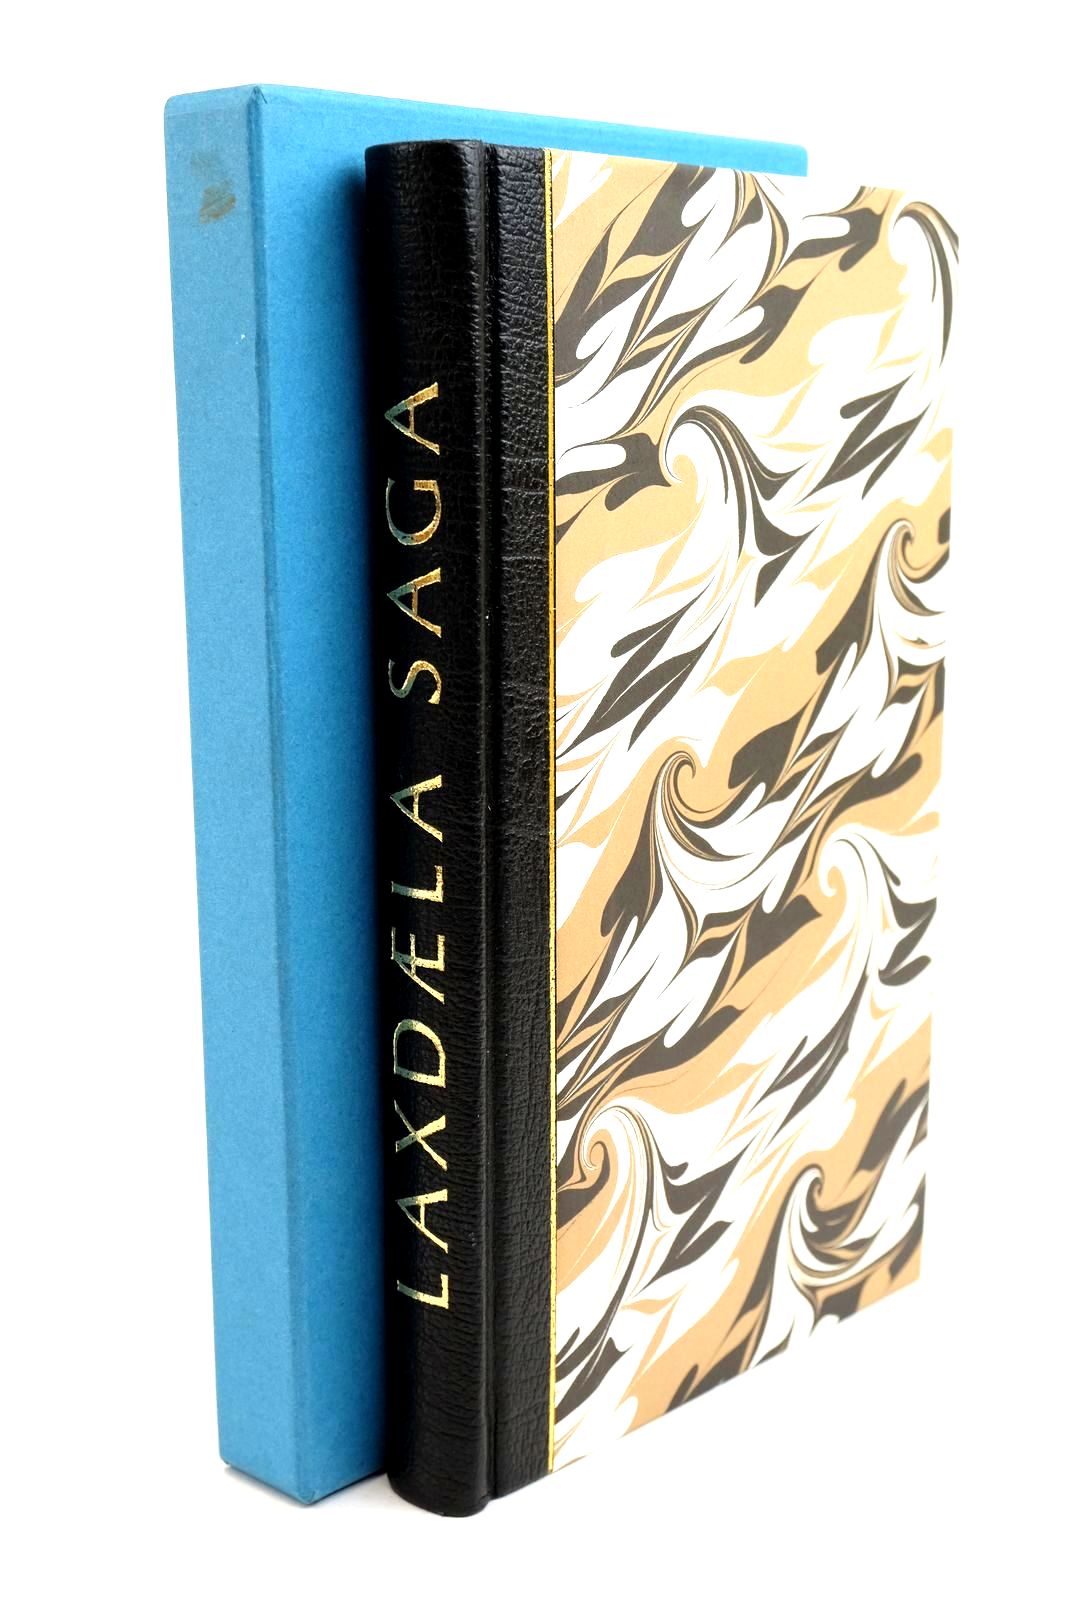 Photo of LAXDAELA SAGA written by Magnusson, Magnus Palsson, Hermann illustrated by Pendrey, Peter published by Folio Society (STOCK CODE: 1321306)  for sale by Stella & Rose's Books